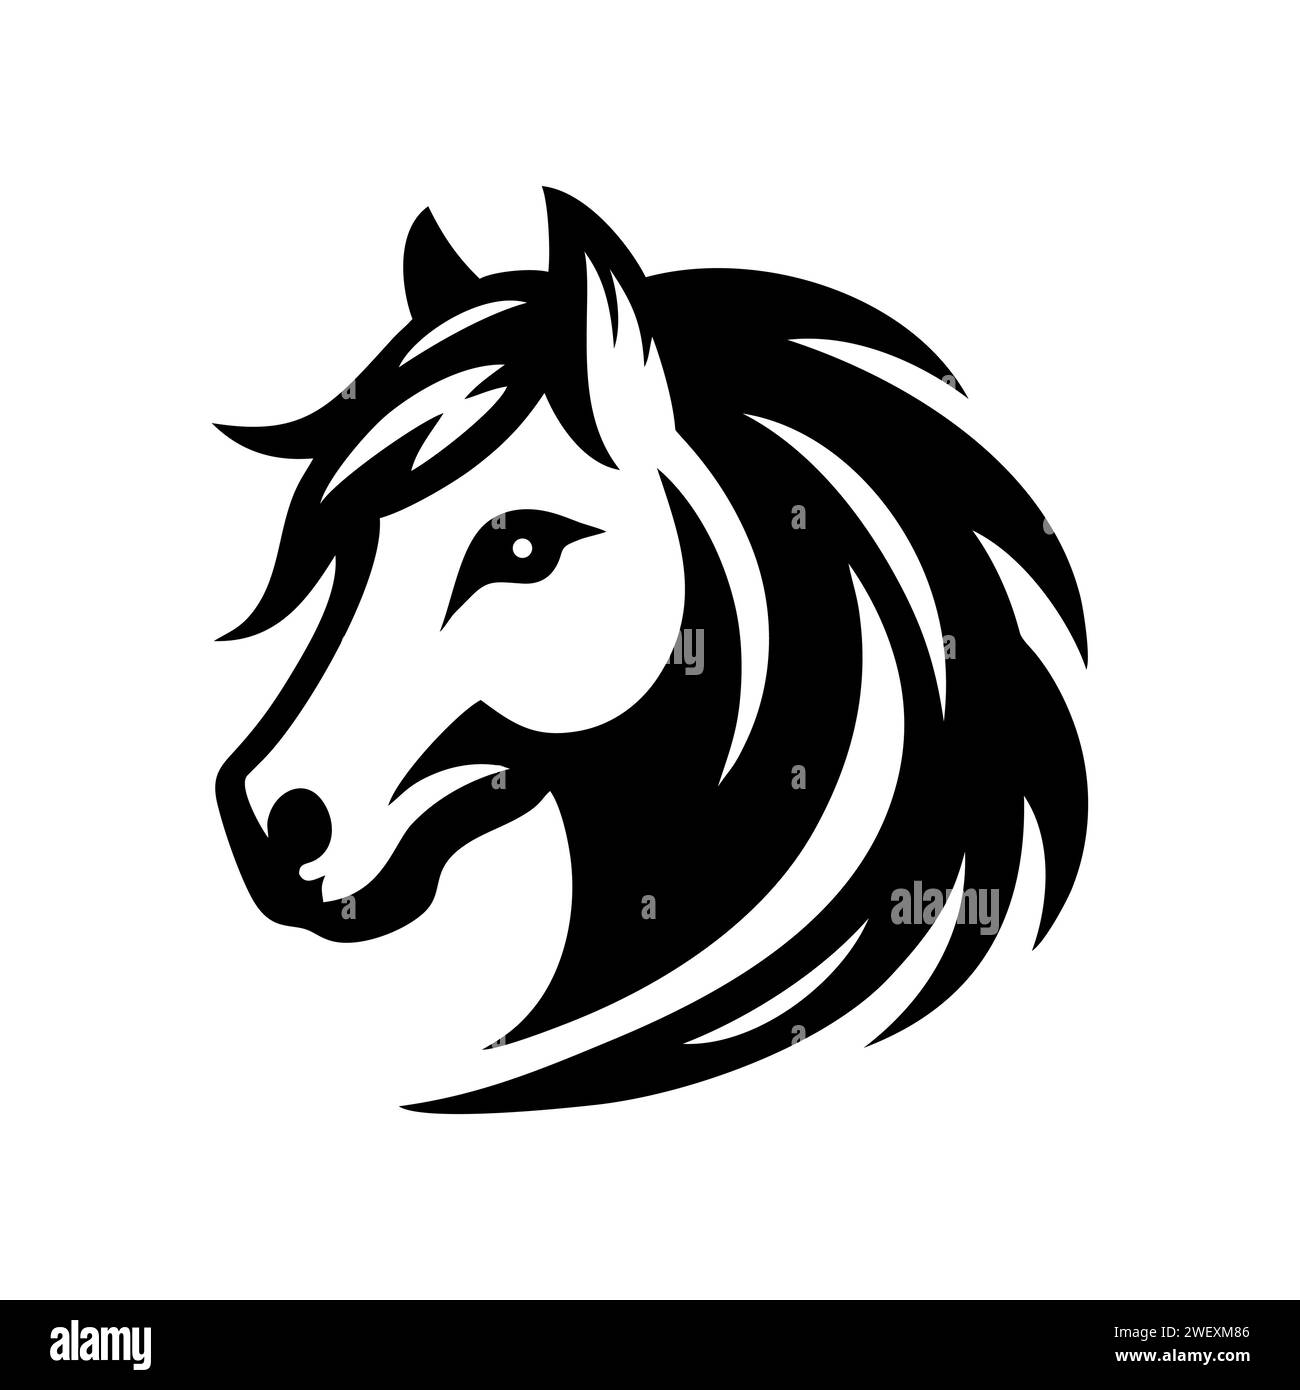 Black horse head silhouette icon. Rearing up horse side view. Vector illustration Stock Vector